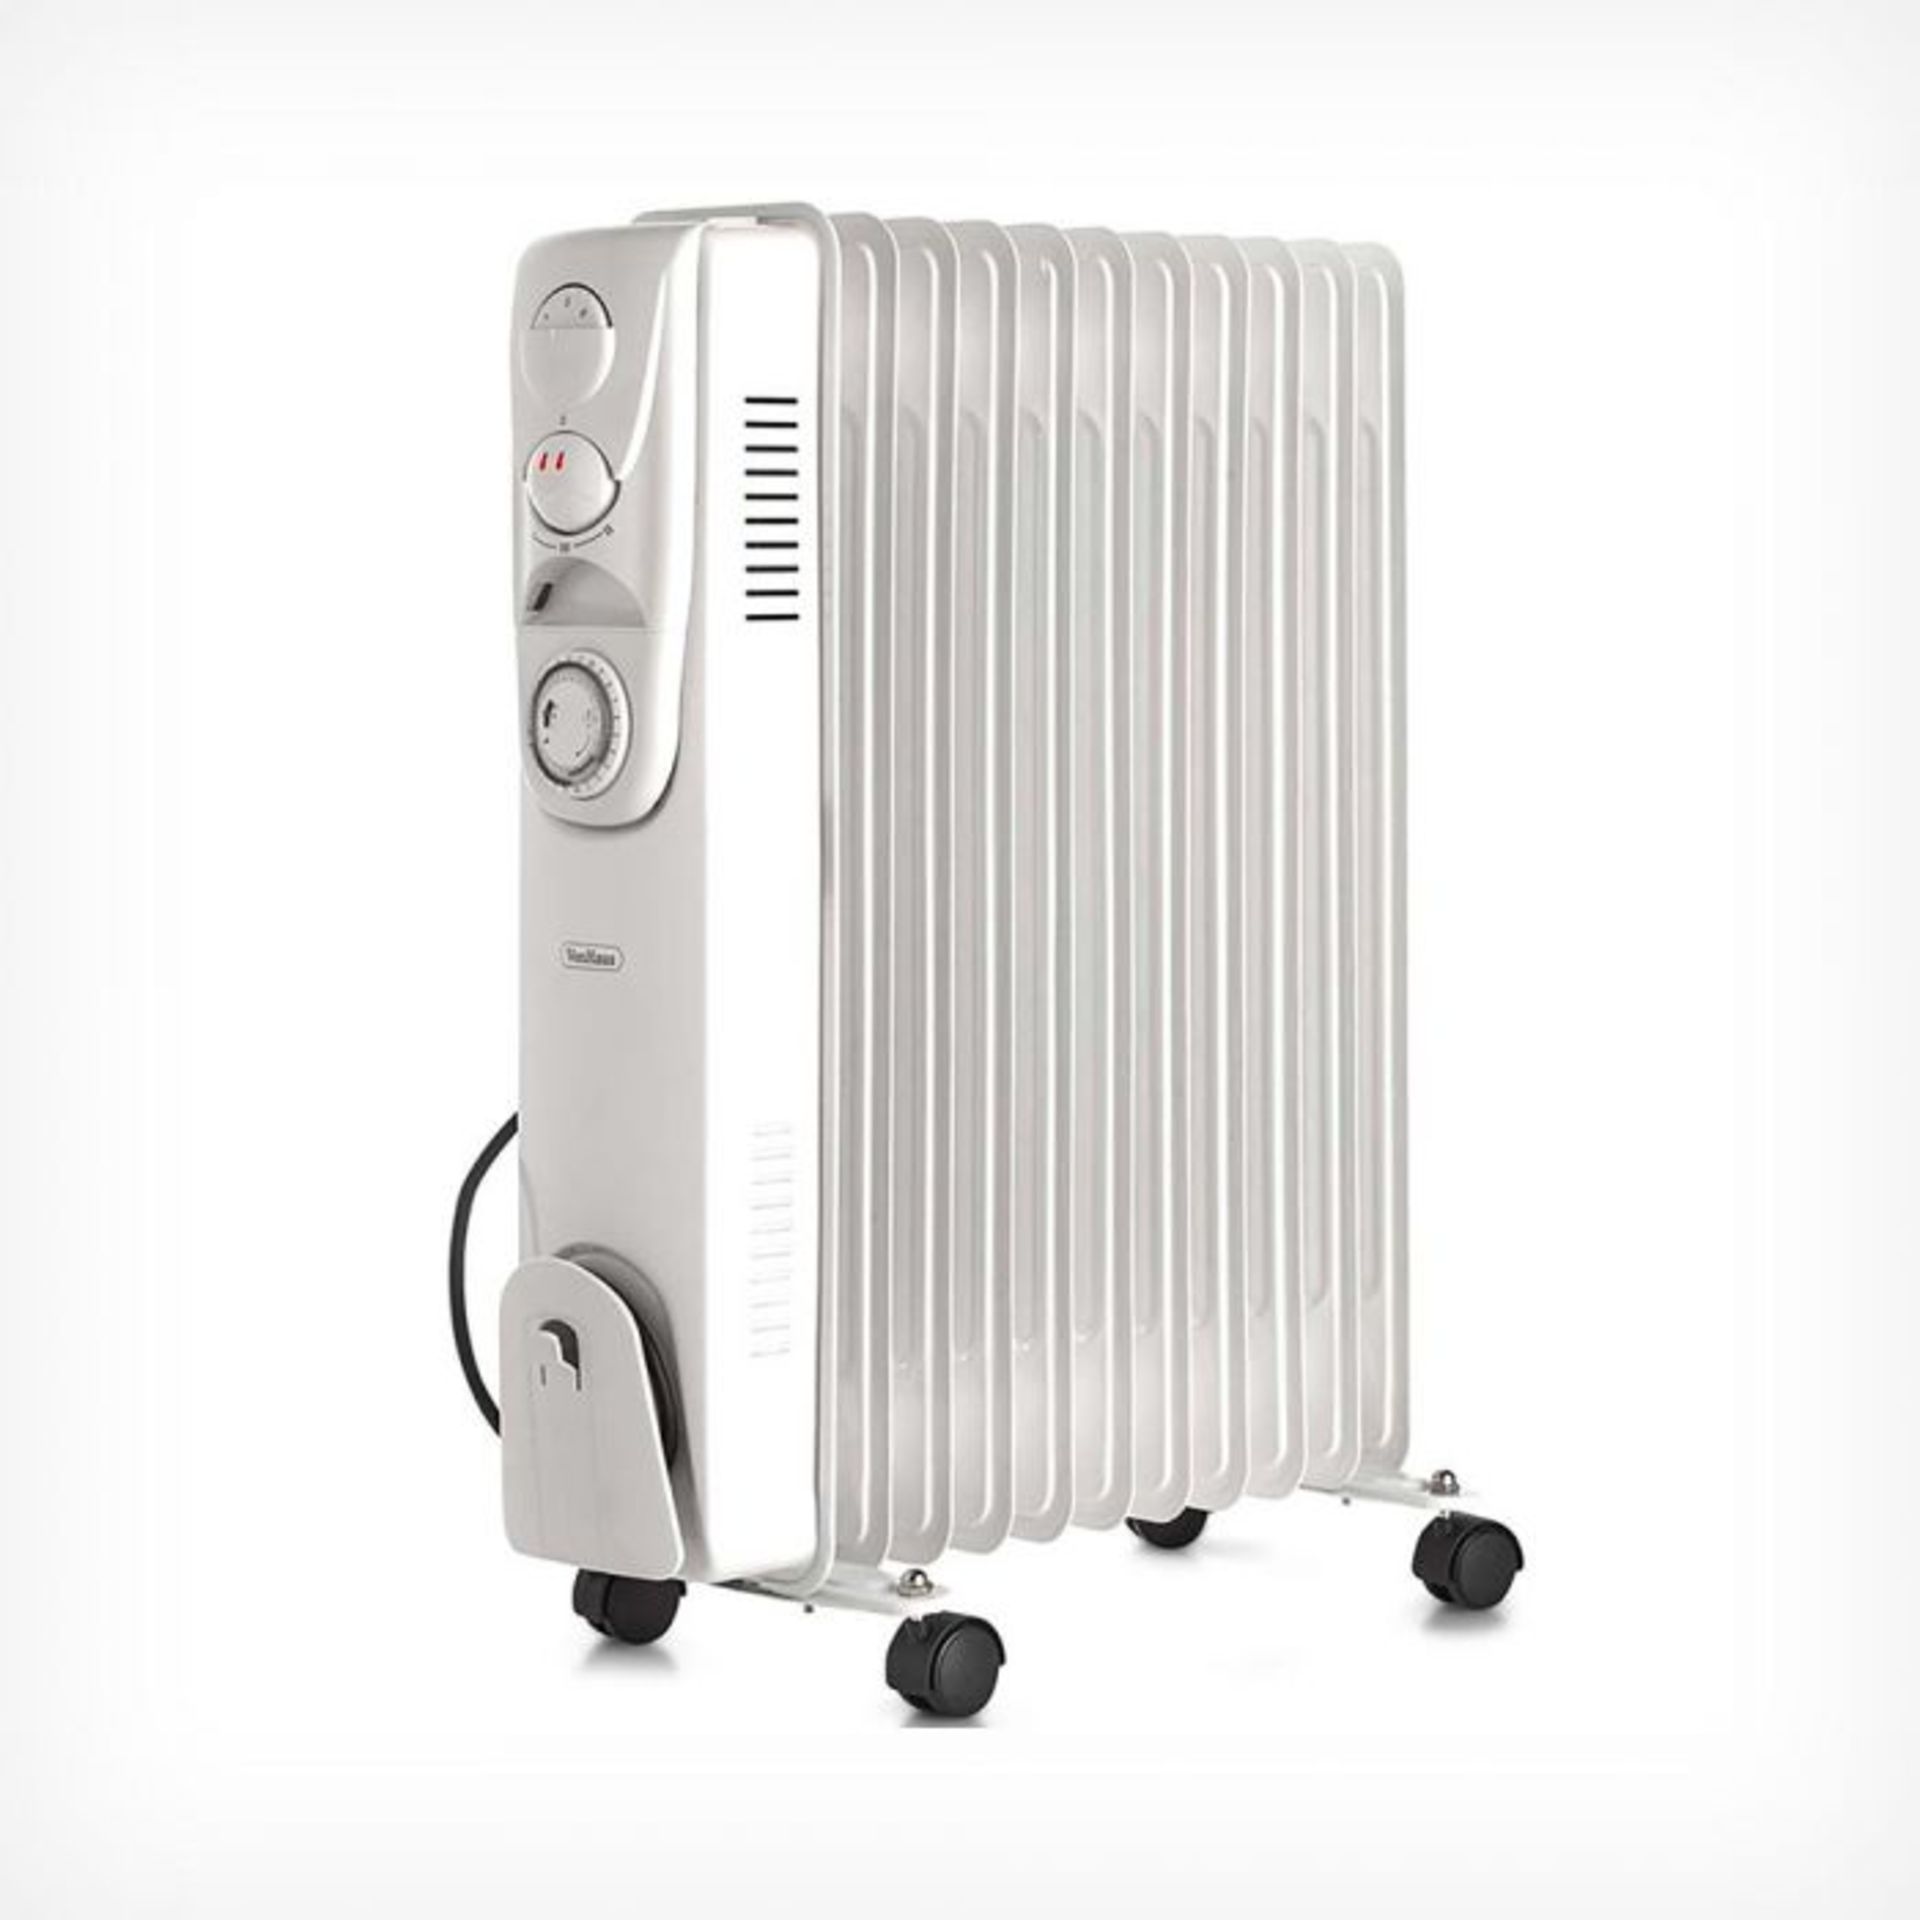 (S425) 11 Fin 2500W Oil Filled Radiator - White Suitable for areas up to 28 square metres 3 p... - Image 2 of 3